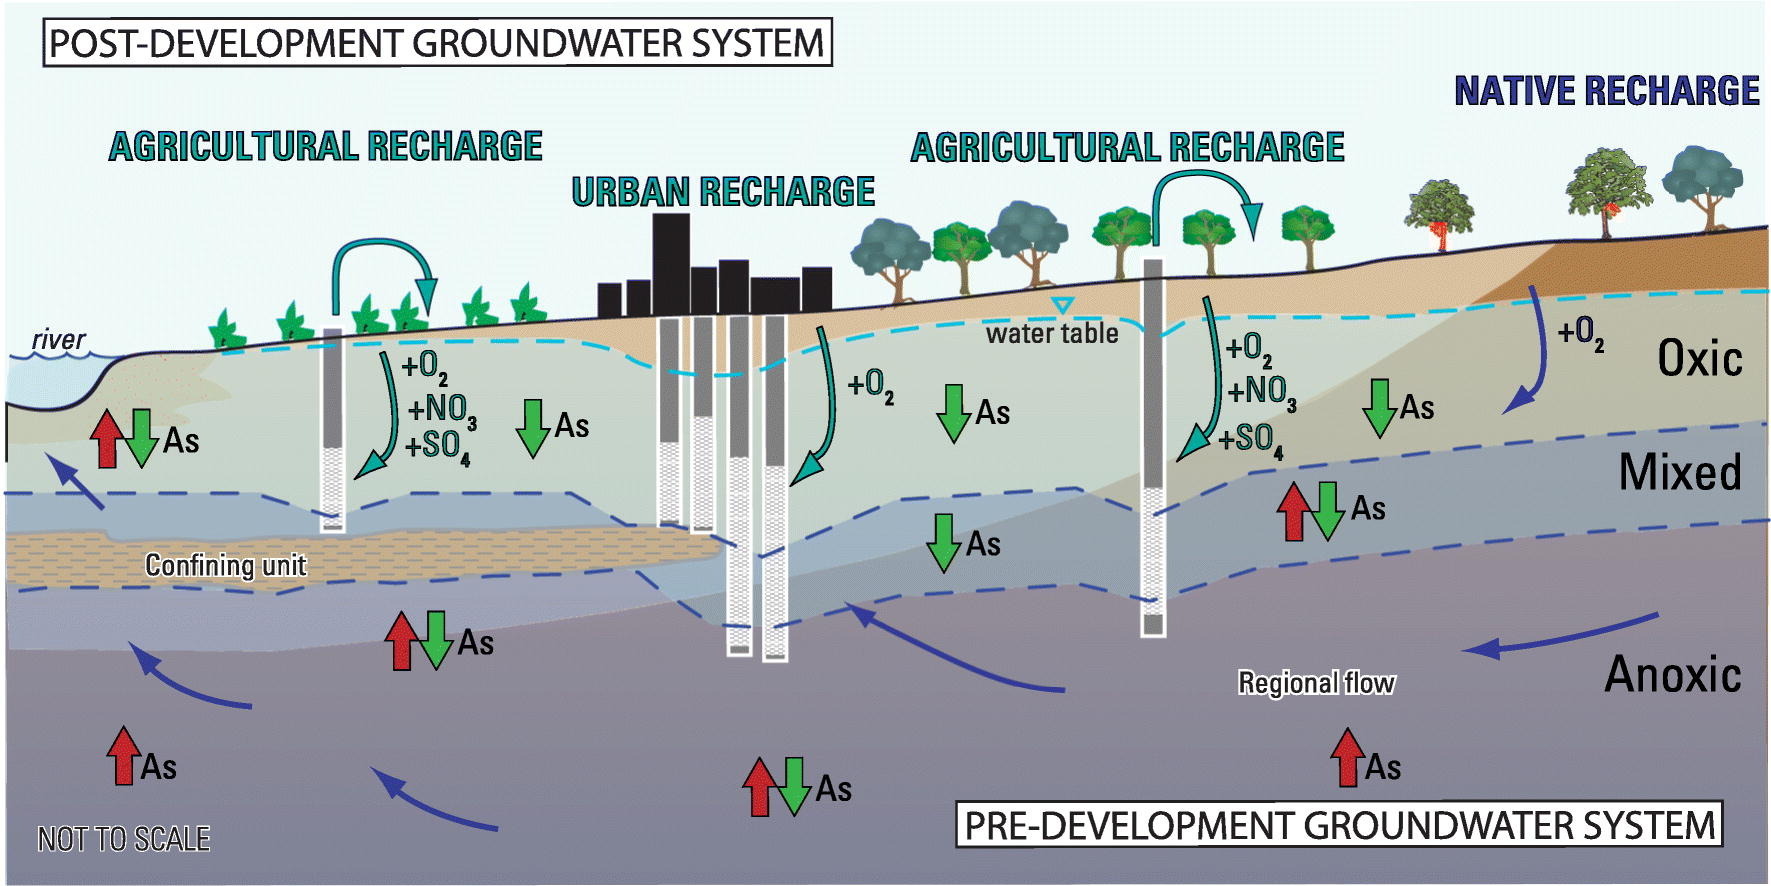 Conceptual model of wells showing factors affecting arsenic in groundwater